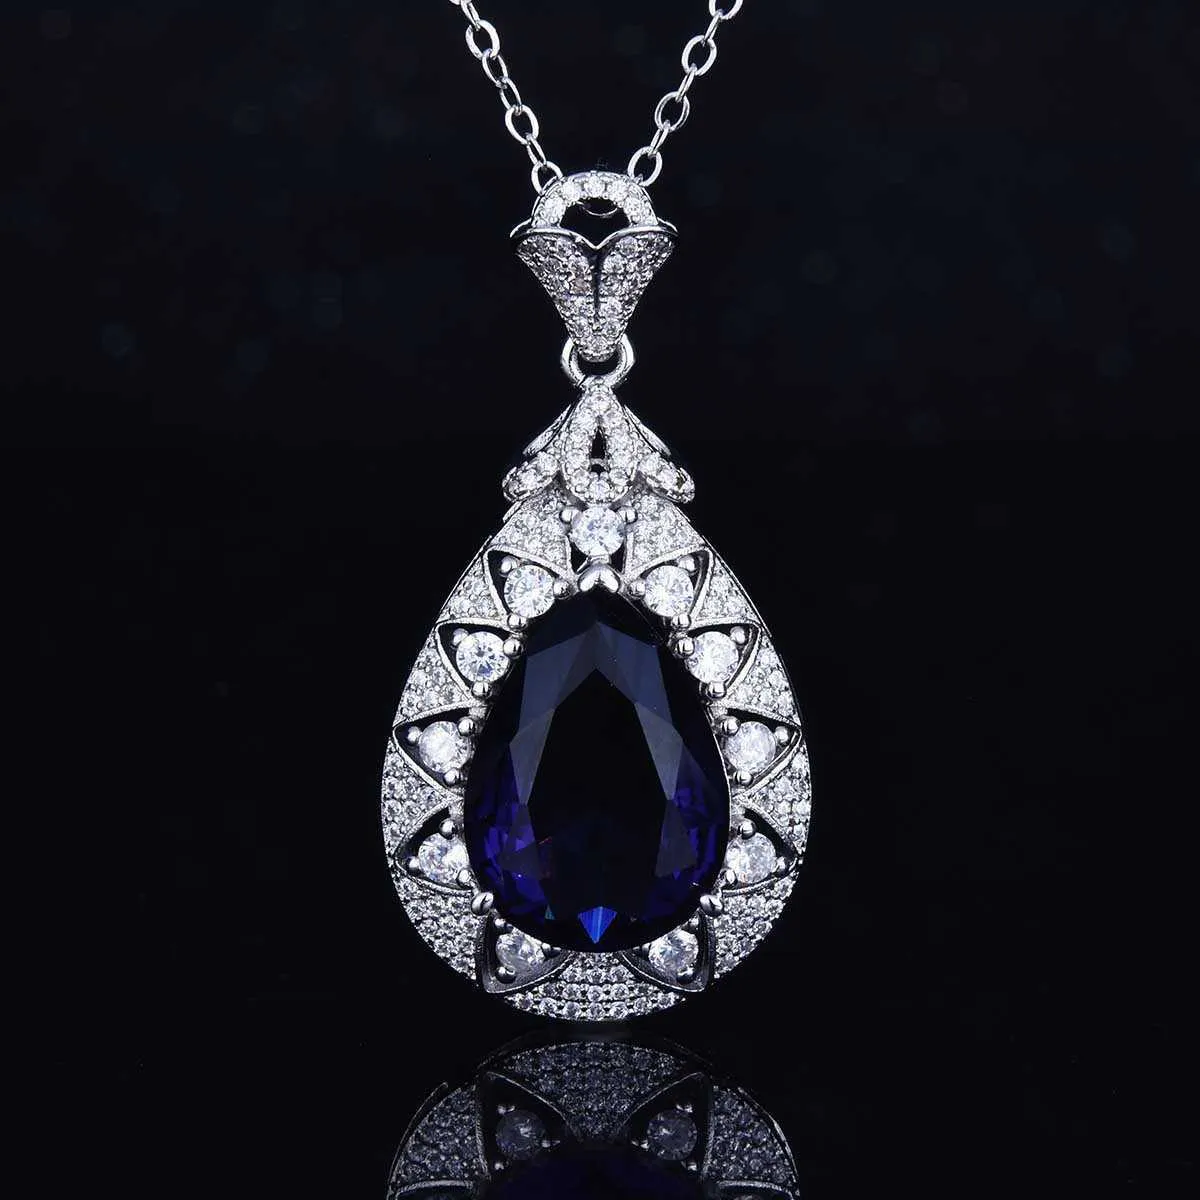 Ny 925 Silver Drop Pear Shaped Necklace Group Inlaid Full Diamonds Luxury Purple Pendant For Women Exquisite smycken hela7766458